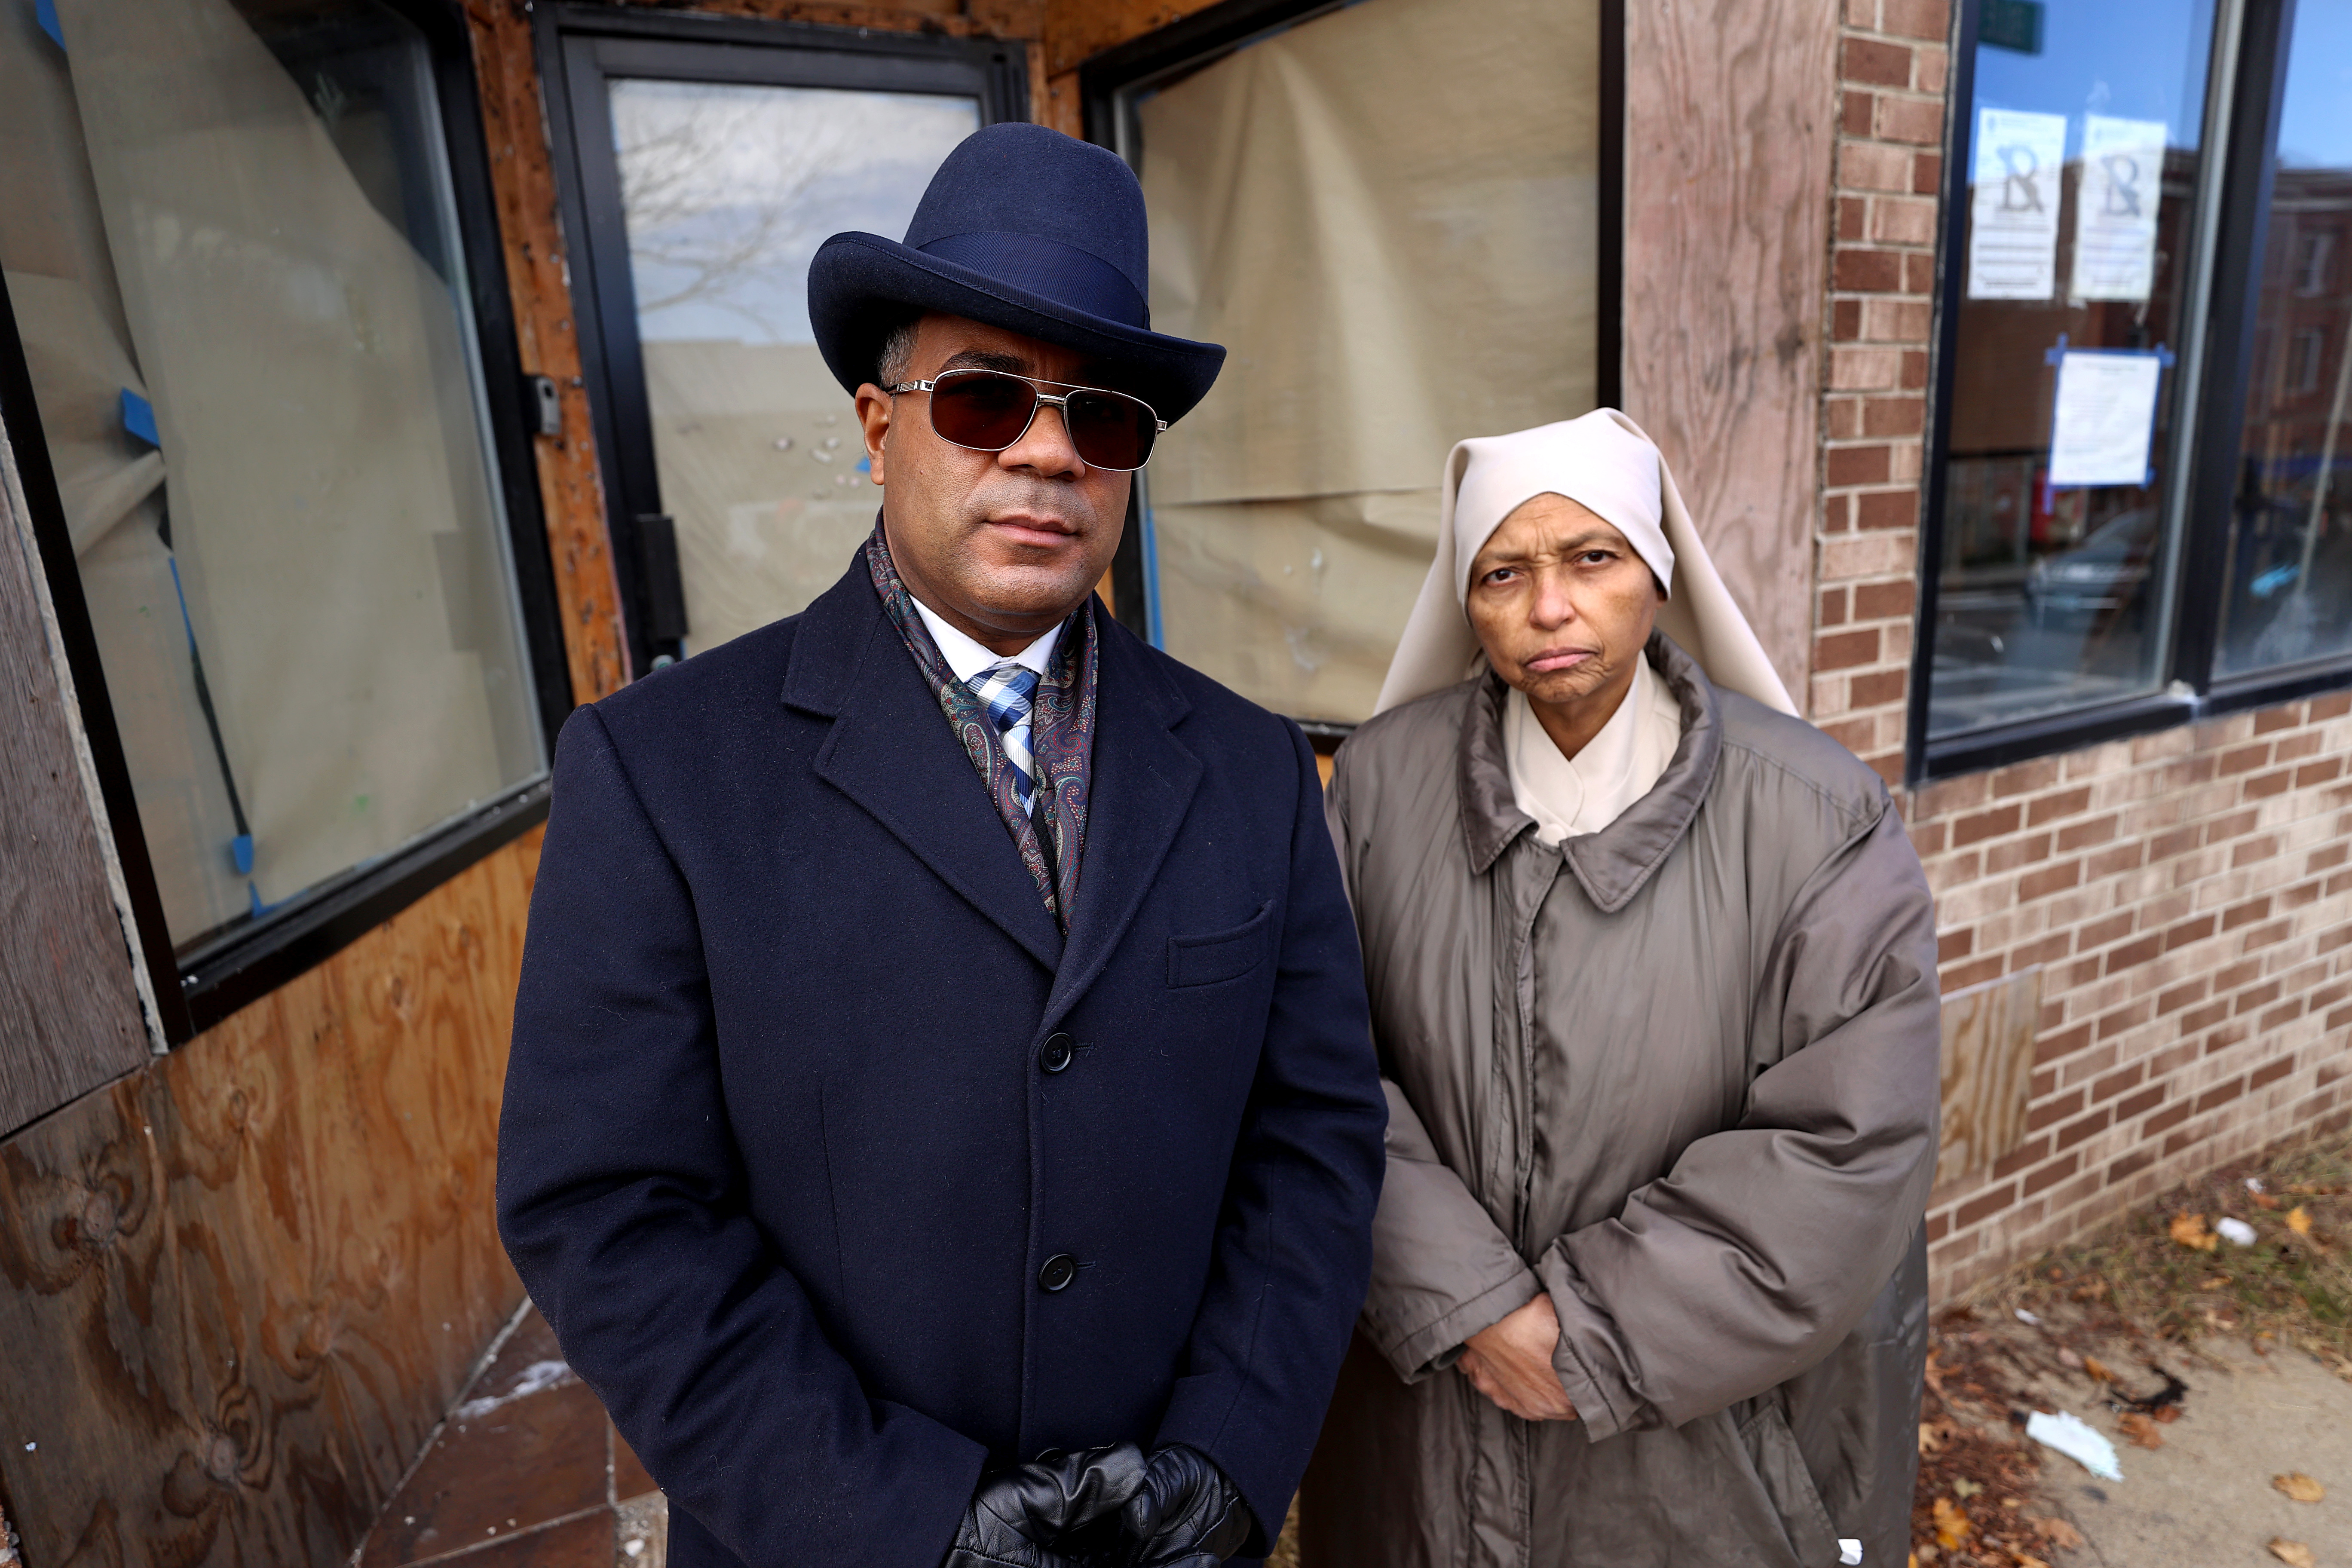 Minister Randy Muhammad and Yvette Muhammad, the daughter of Minister Don Muhammad, stood by the entrance of the EnRoot business on Blue Hill Avenue.